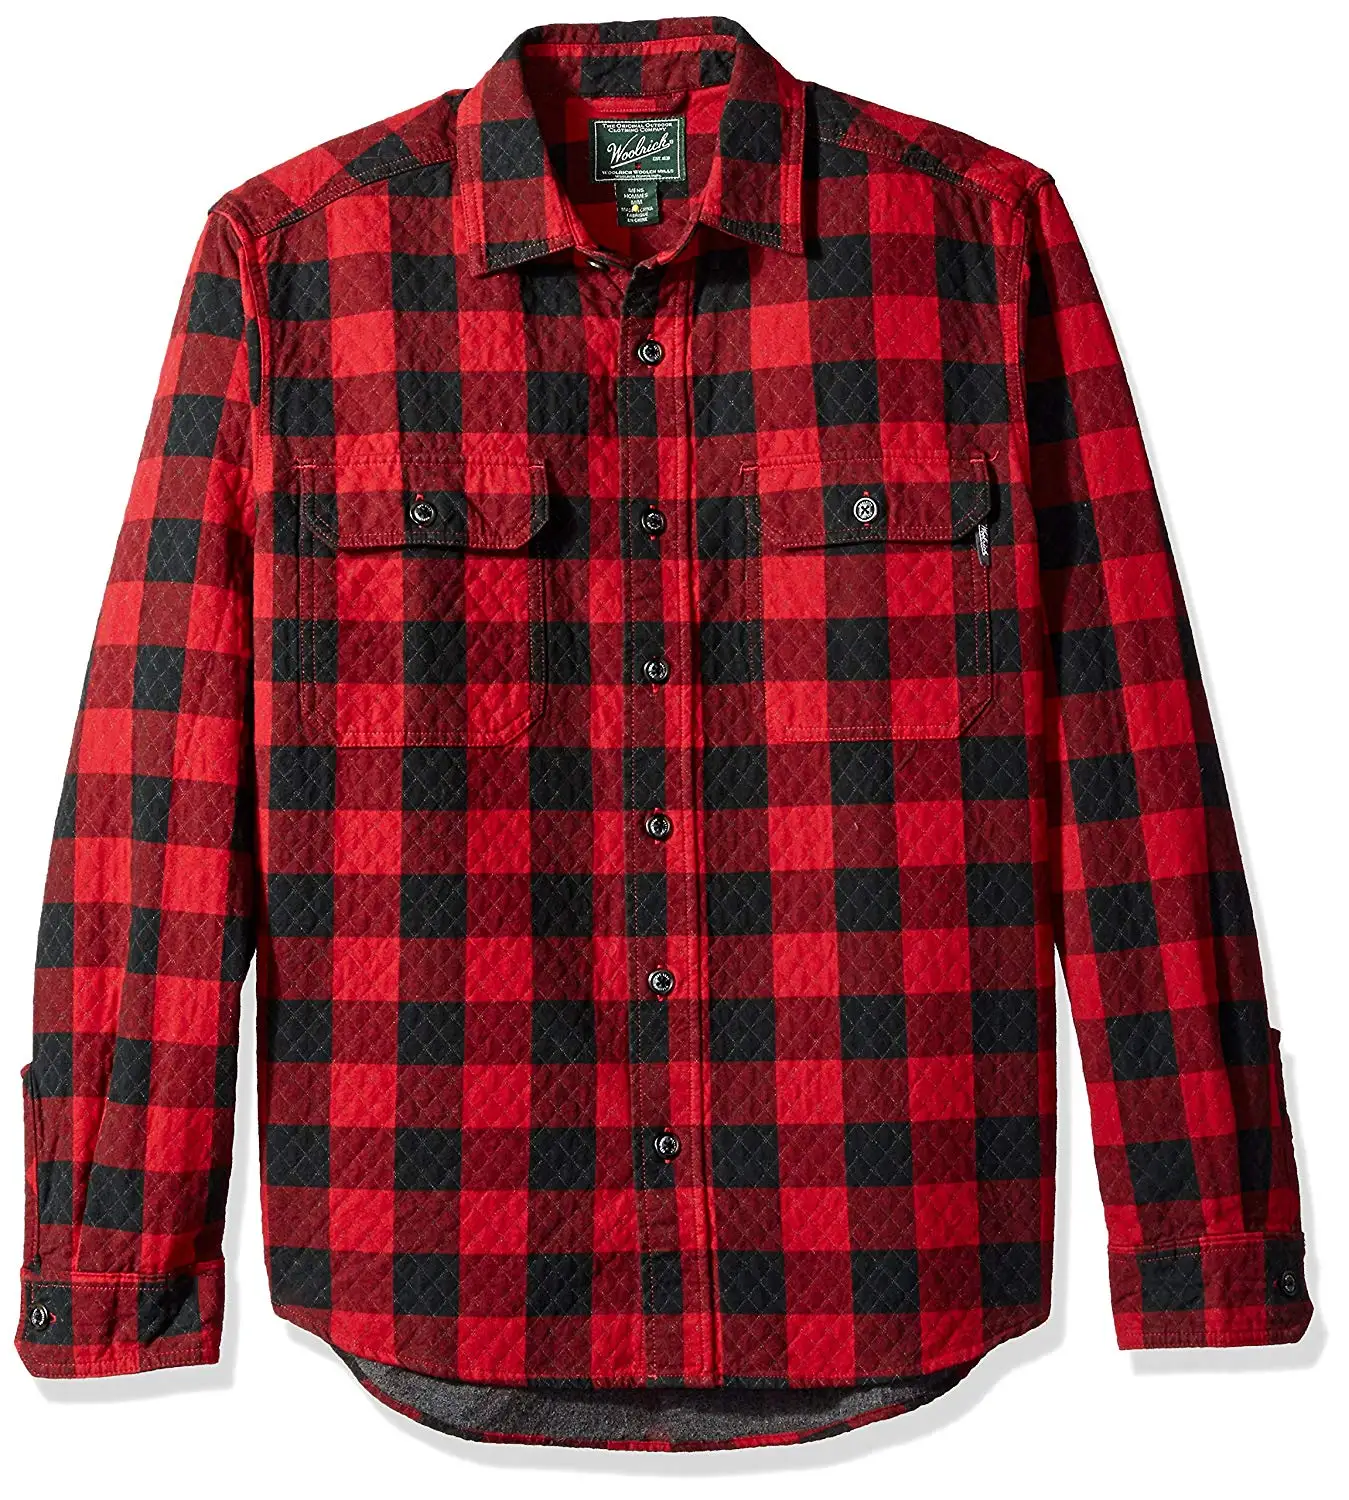 Cheap Quilted Check Shirt, find Quilted Check Shirt deals on line at ...